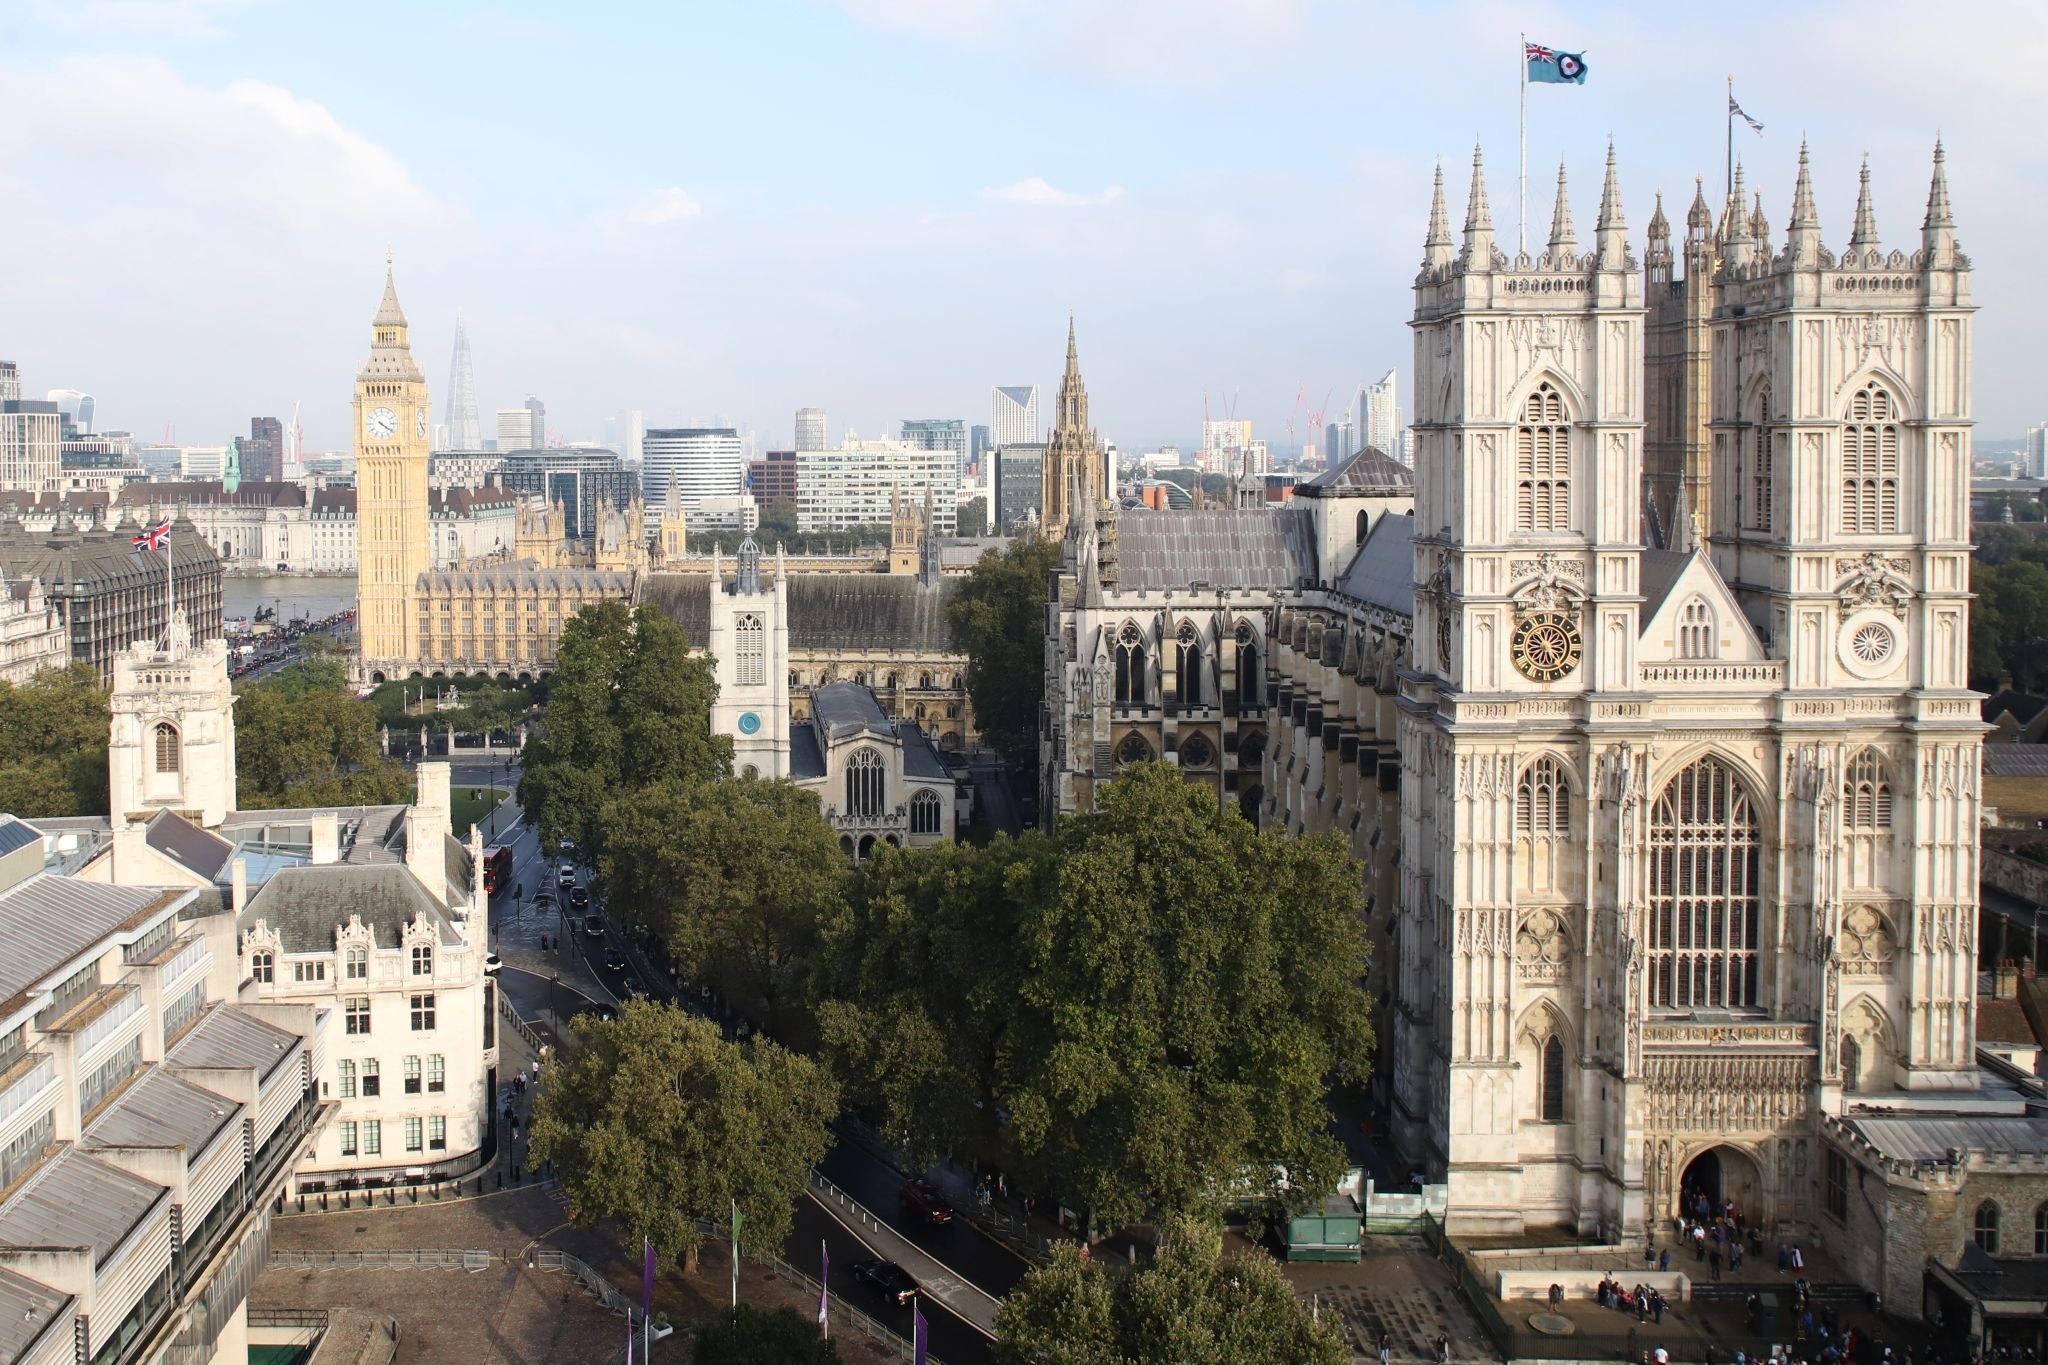 Westminster Abbey, St Margret's Church and the Houses of Parliament. Royal Air Force ensign (flag) flying from Westminster Abbey for Battle of Britain Sunday. View from the balcony of the dome on Methodist Central Hall. 17-Sep-2023.